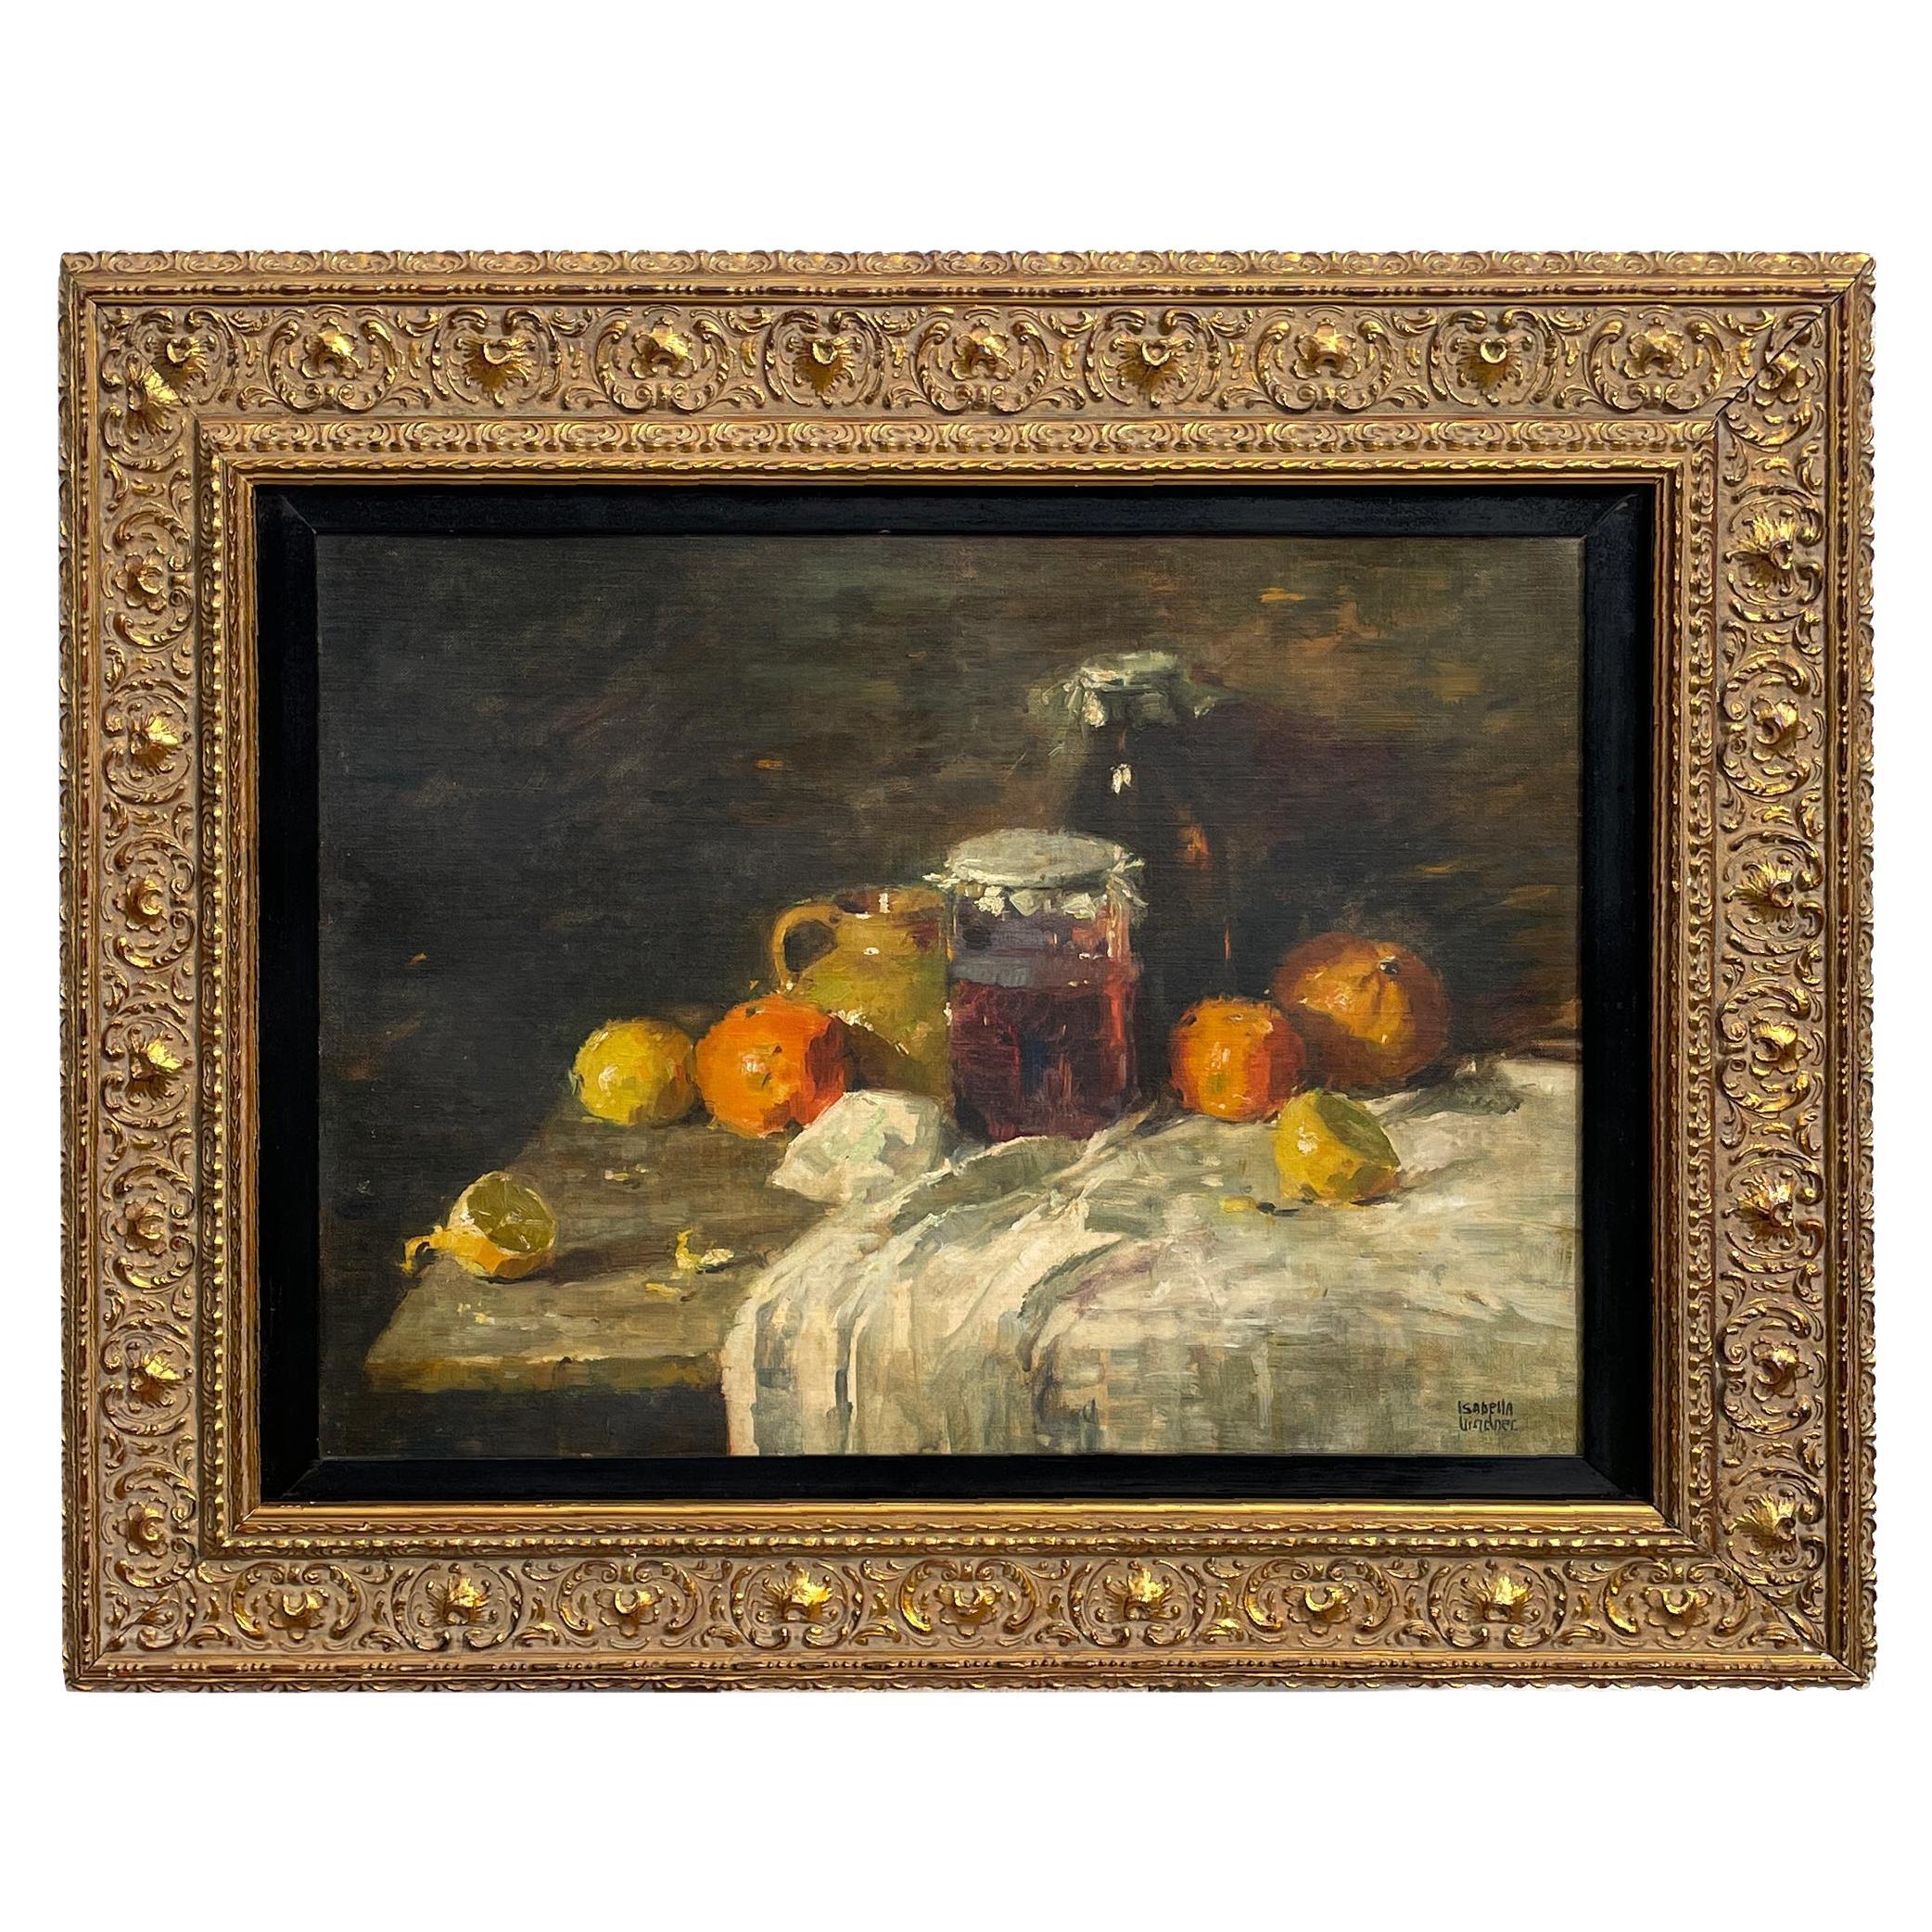  Still Life with Fruit Oil on Canvas, Isabella Lindner, 1930 For Sale